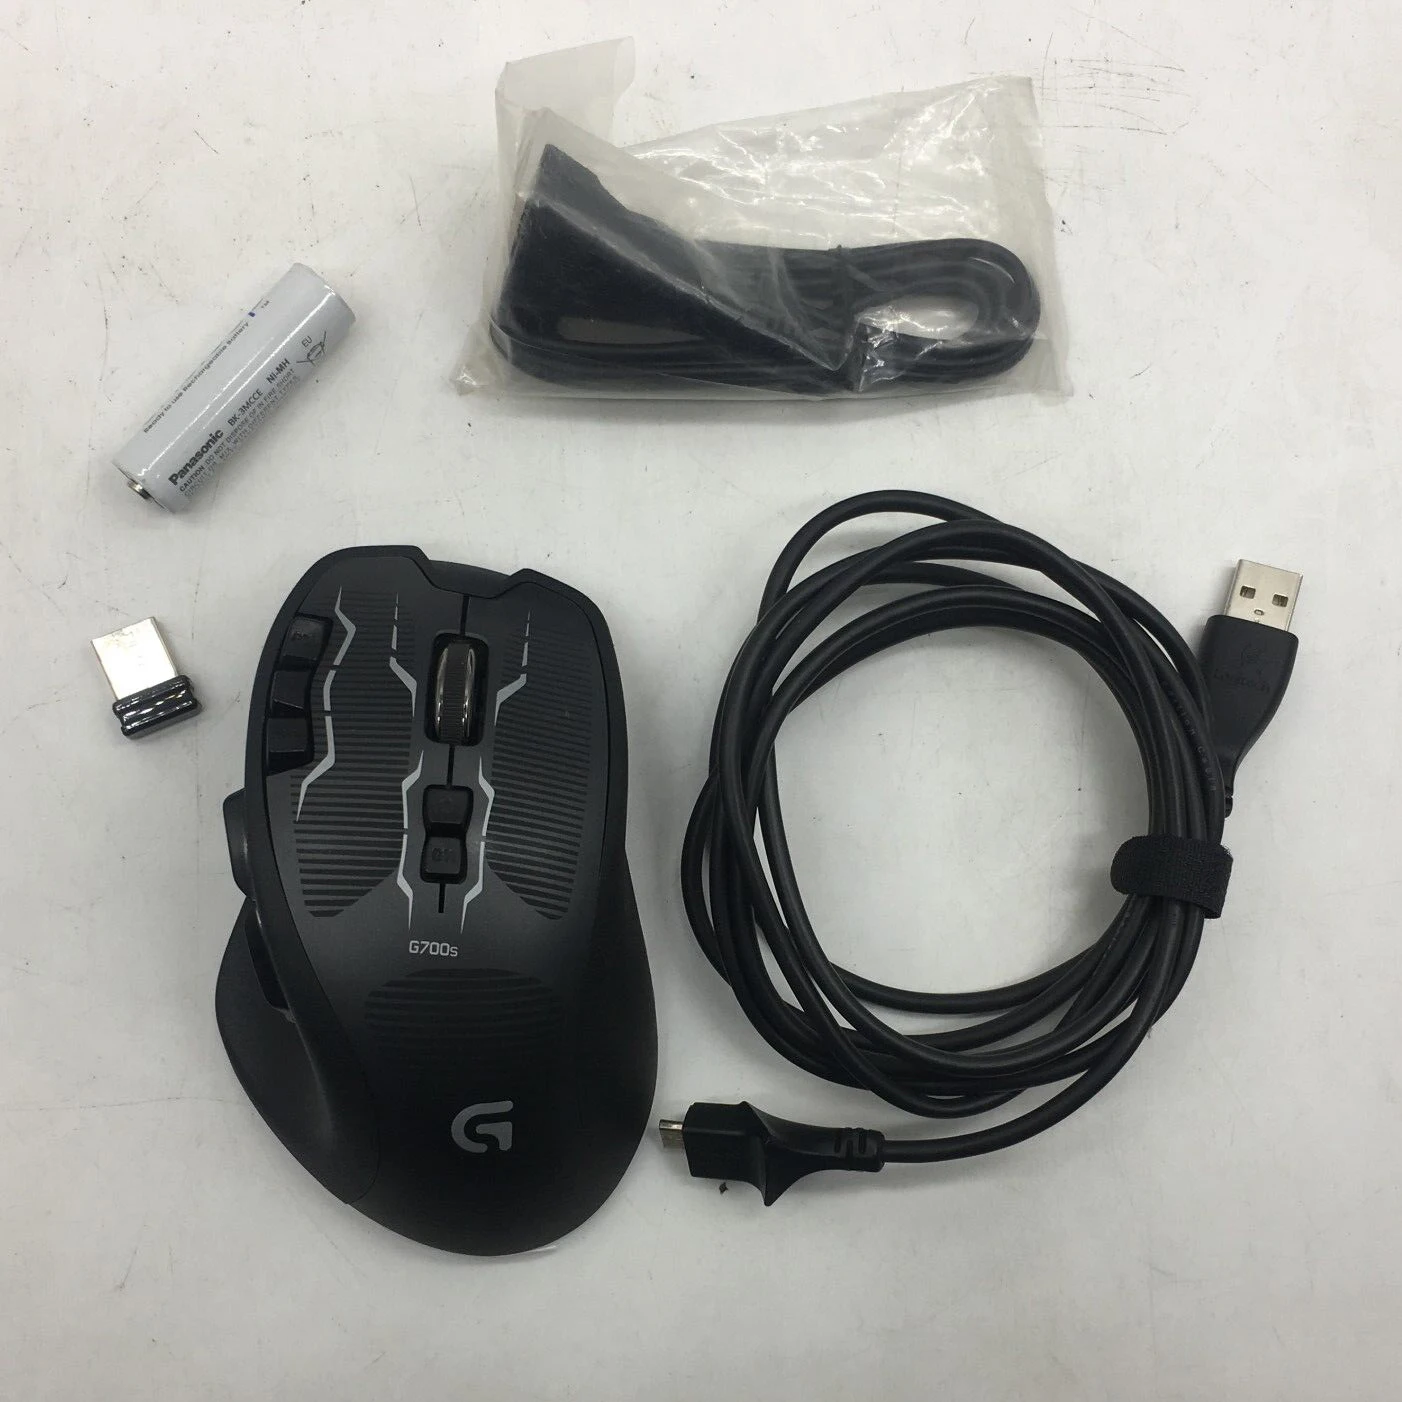 Wholesale New 8200DPI Logitech G700s Rechargeable Gaming 2.4G or Wired USB Gaming Mouse From m.alibaba.com